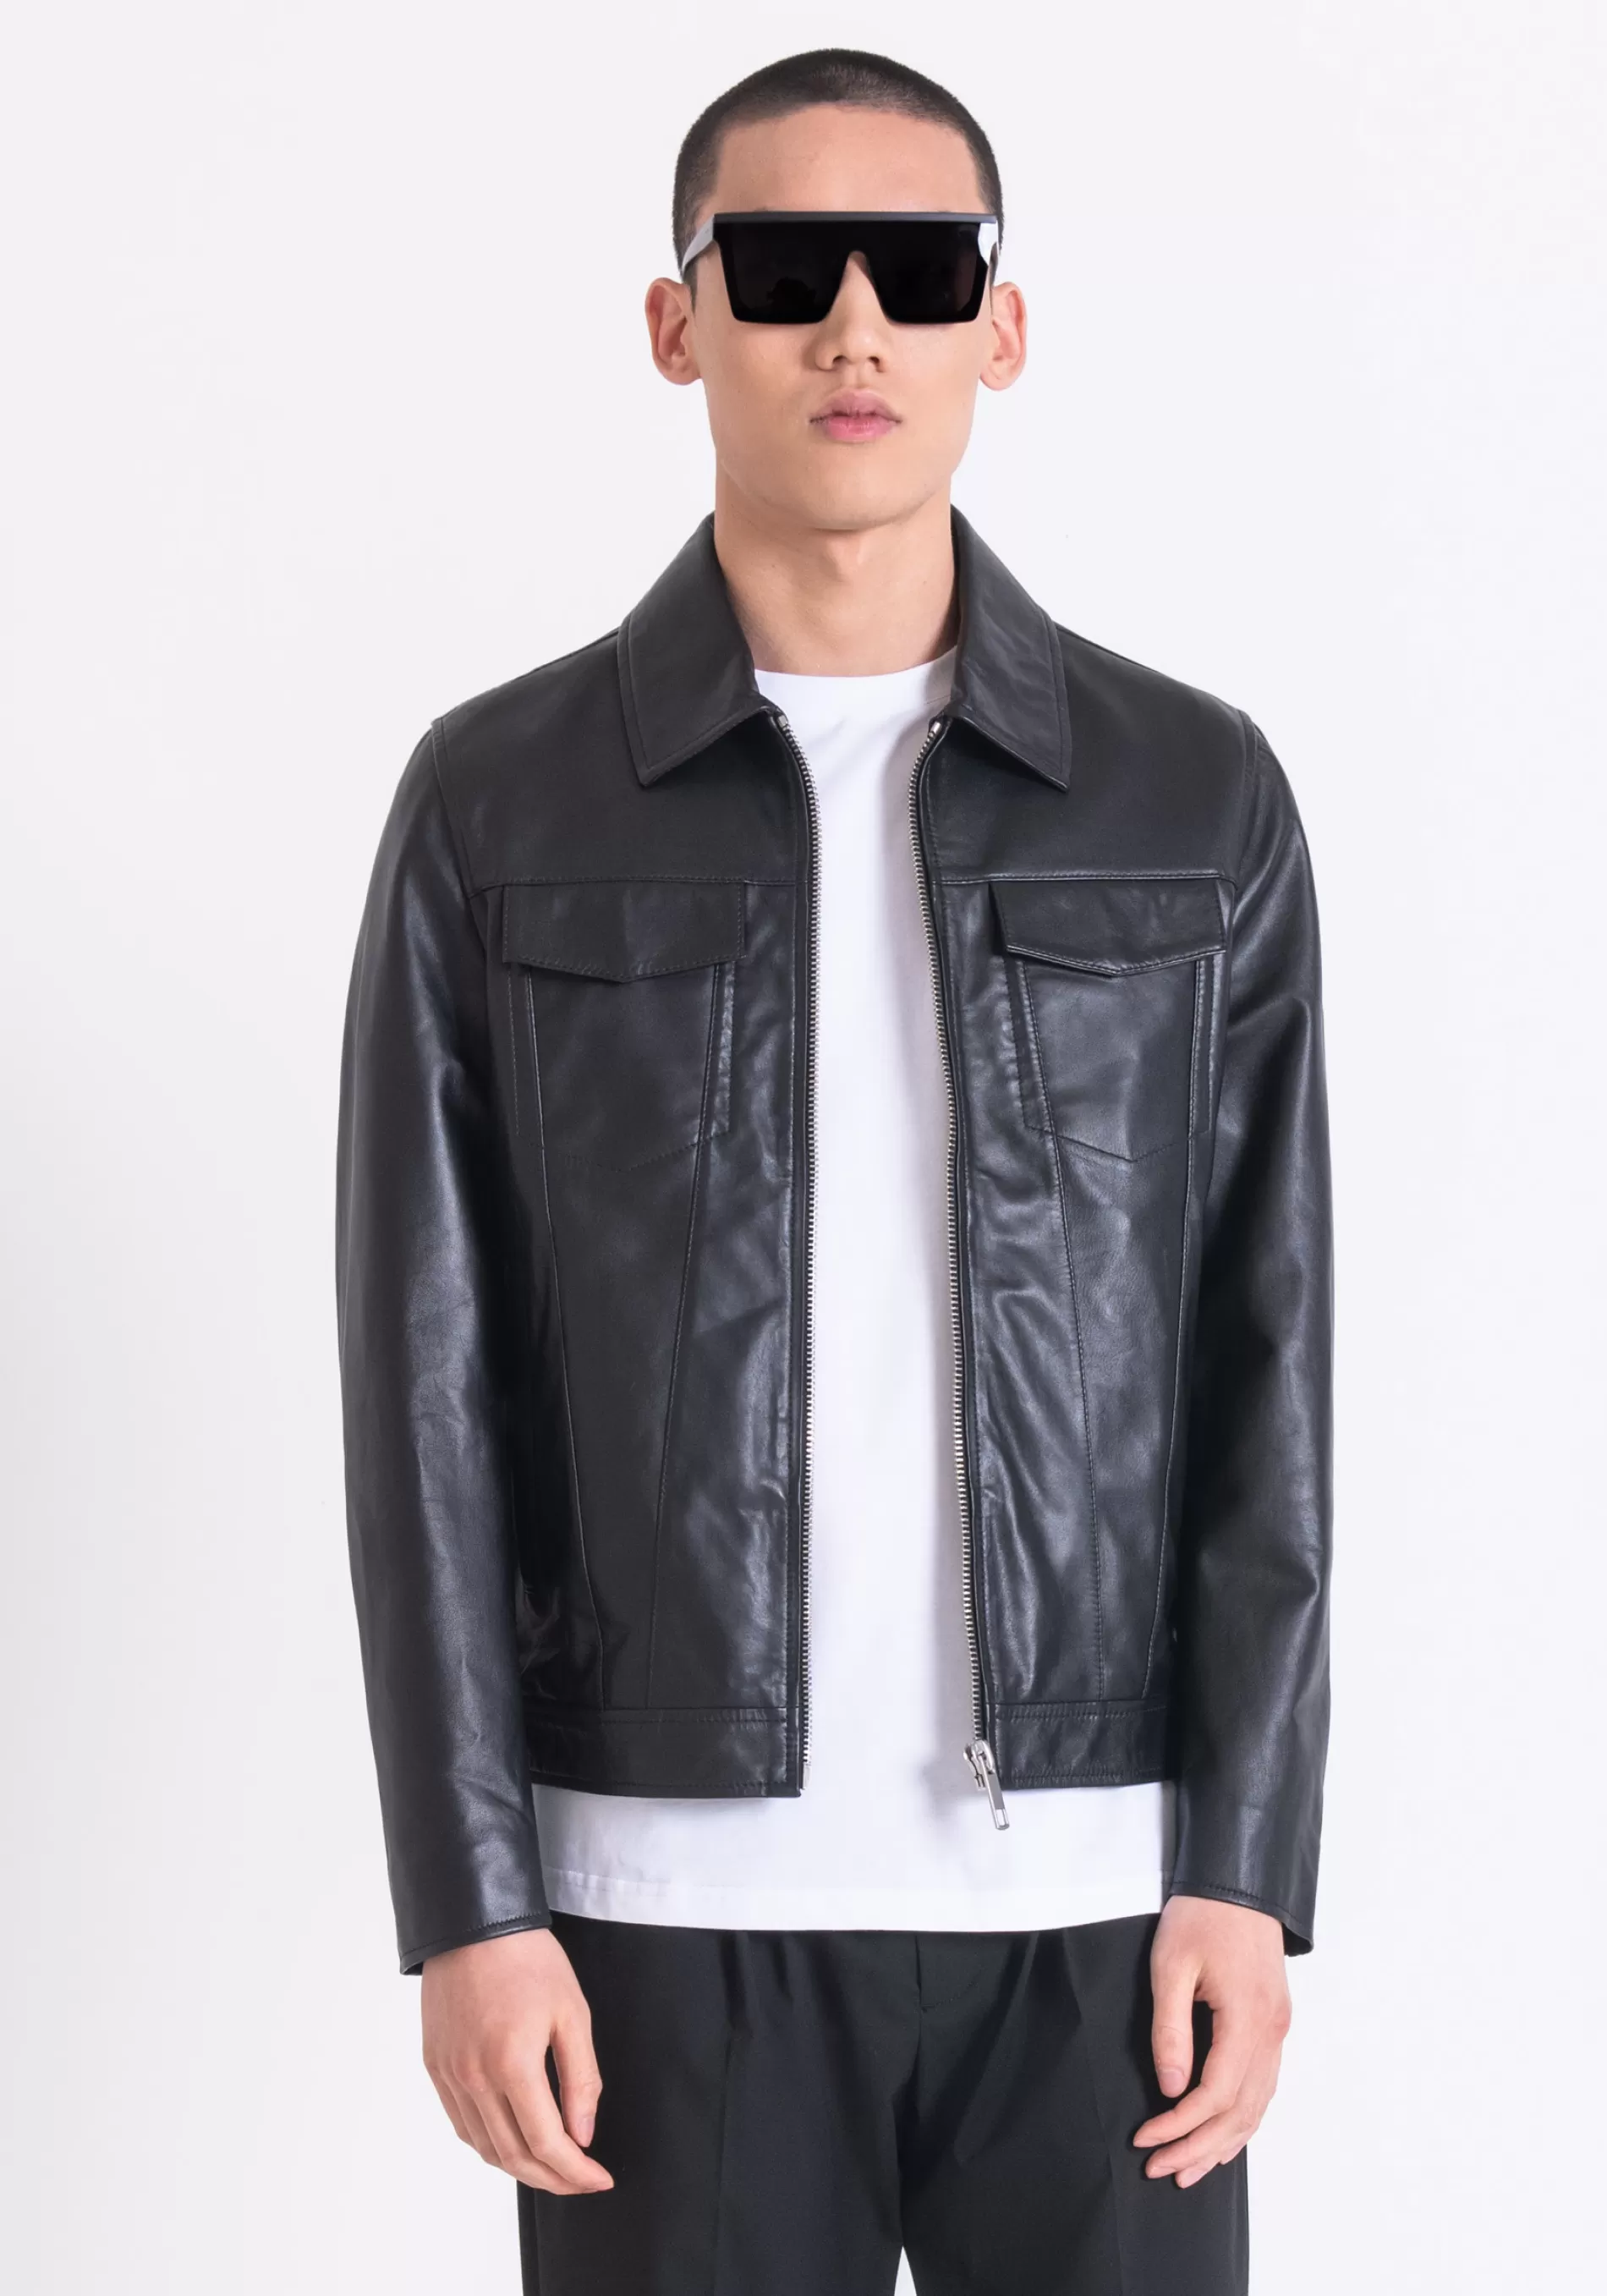 Hot SLIM FIT JACKET IN GENUINE LEATHER Field Jackets and Coats